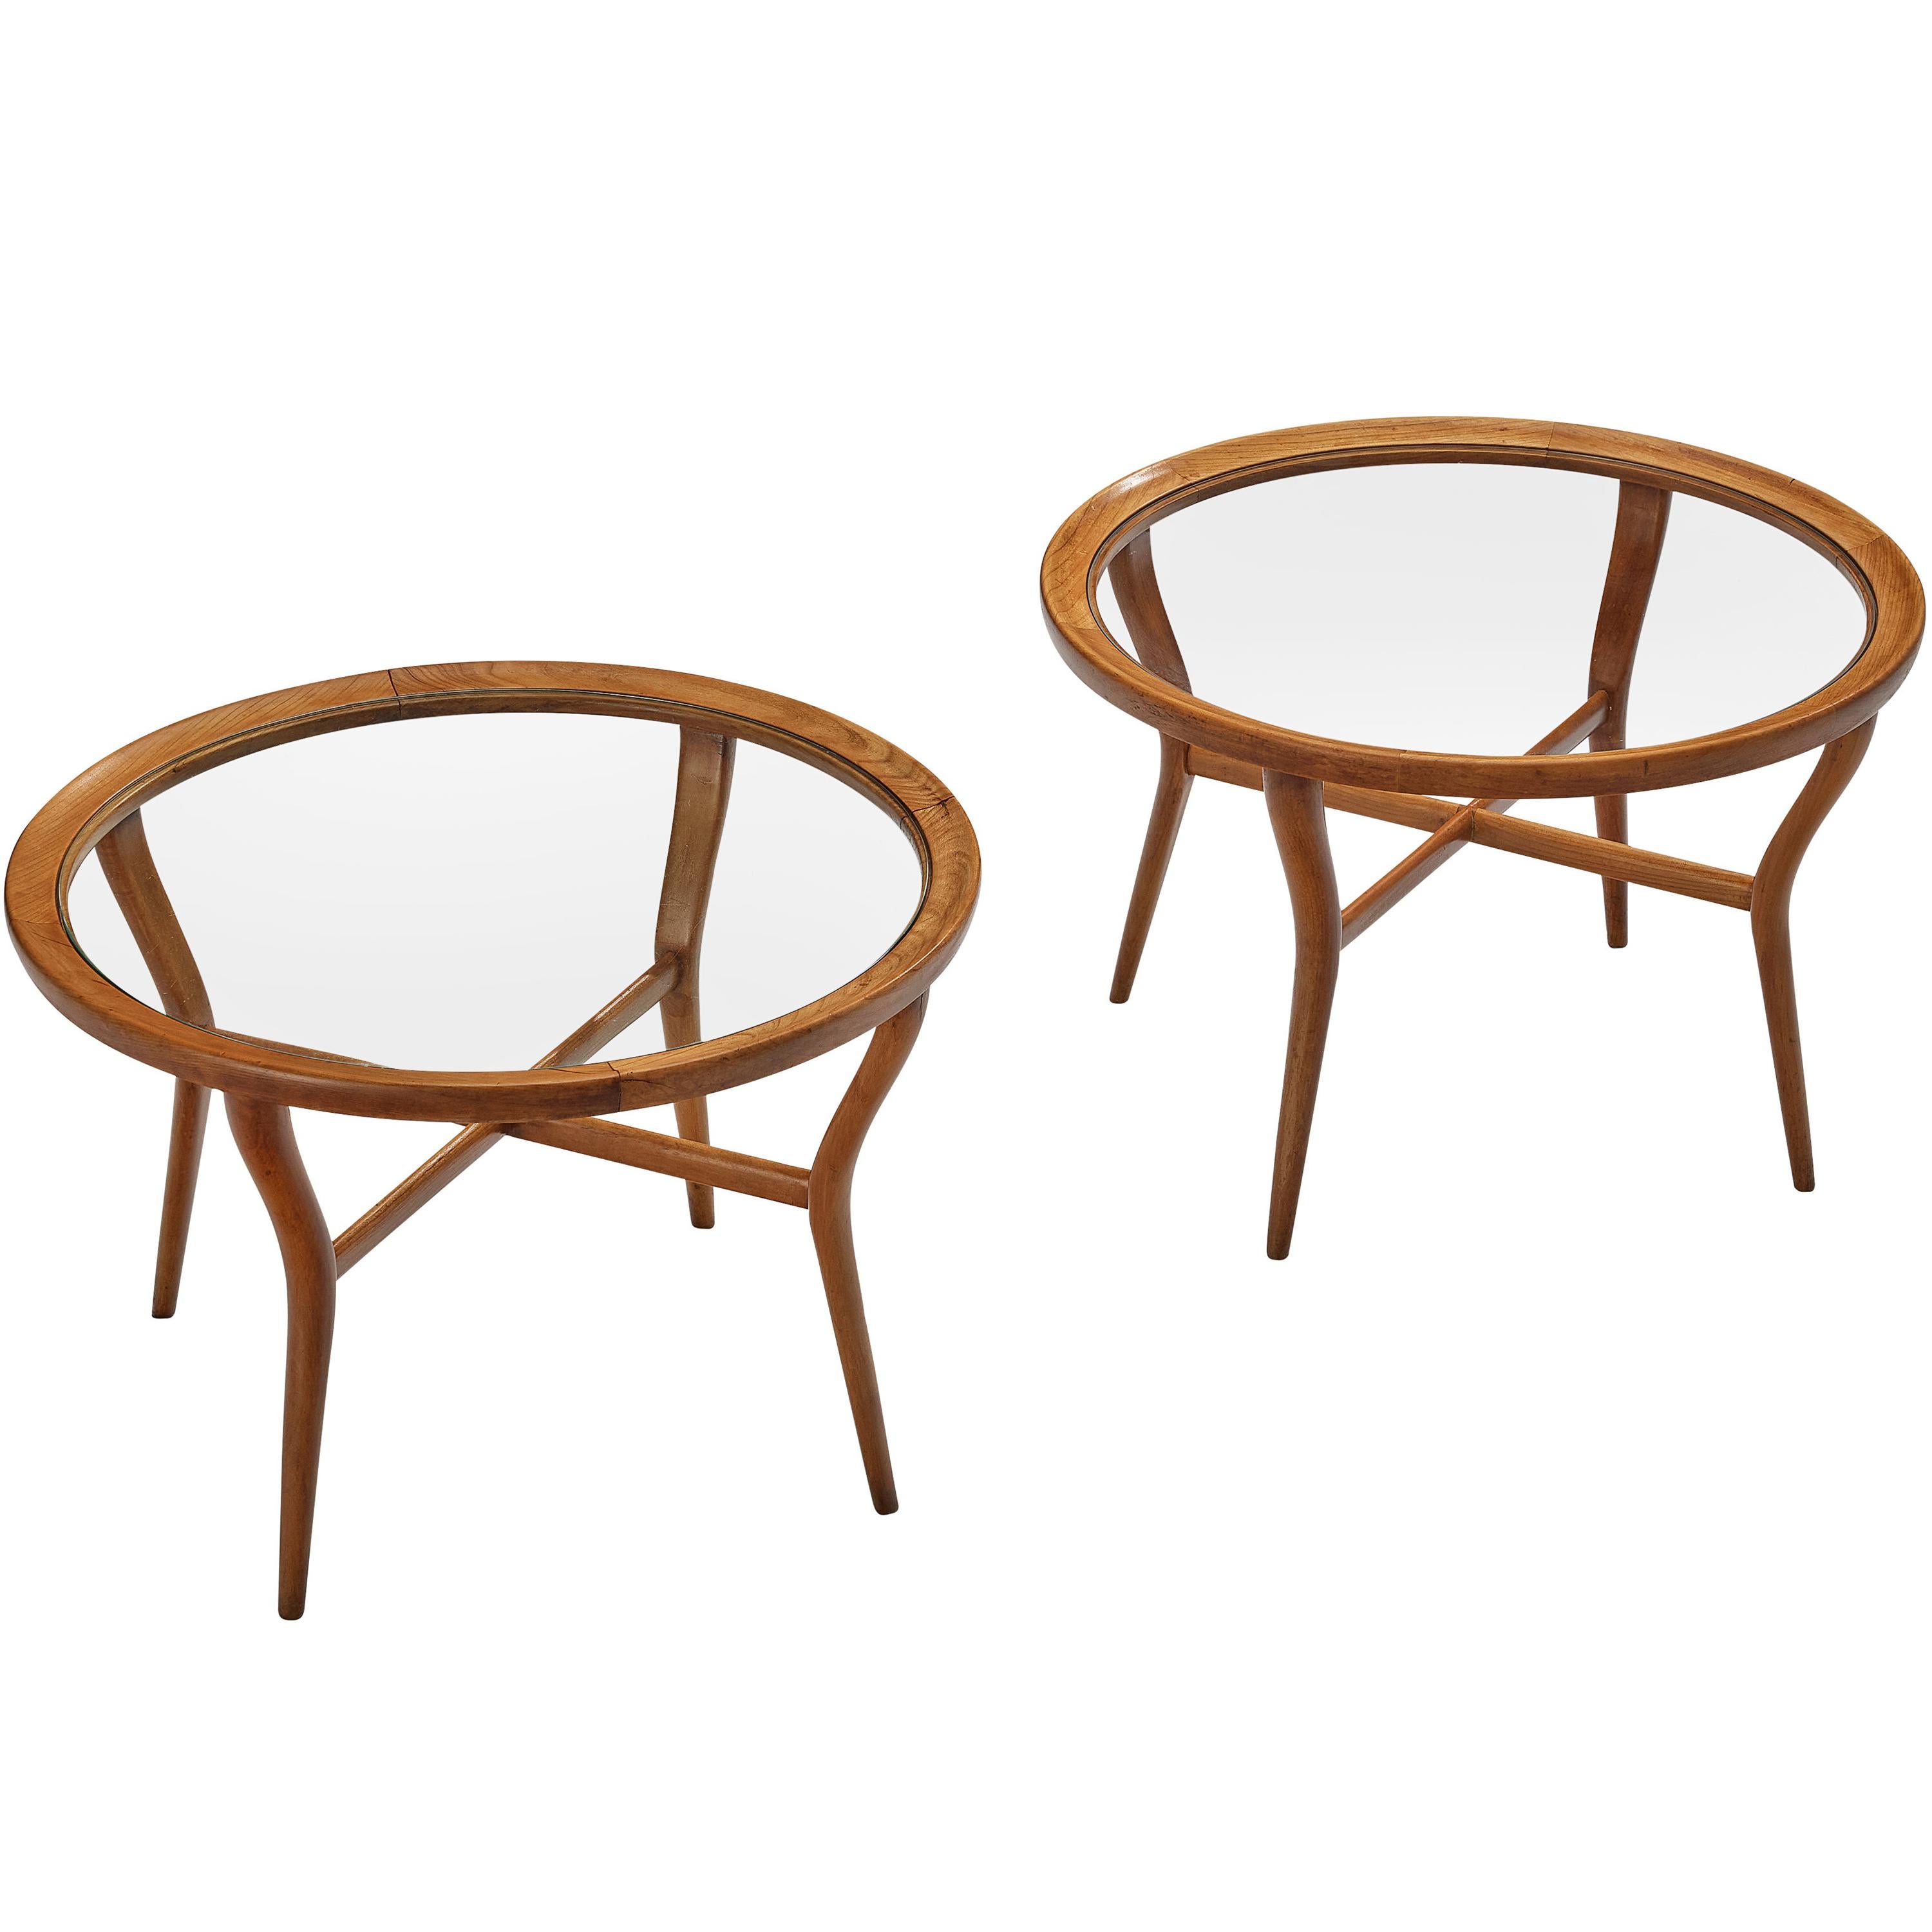 Pair of Italian Coffee Tables in Cherrywood and Glass